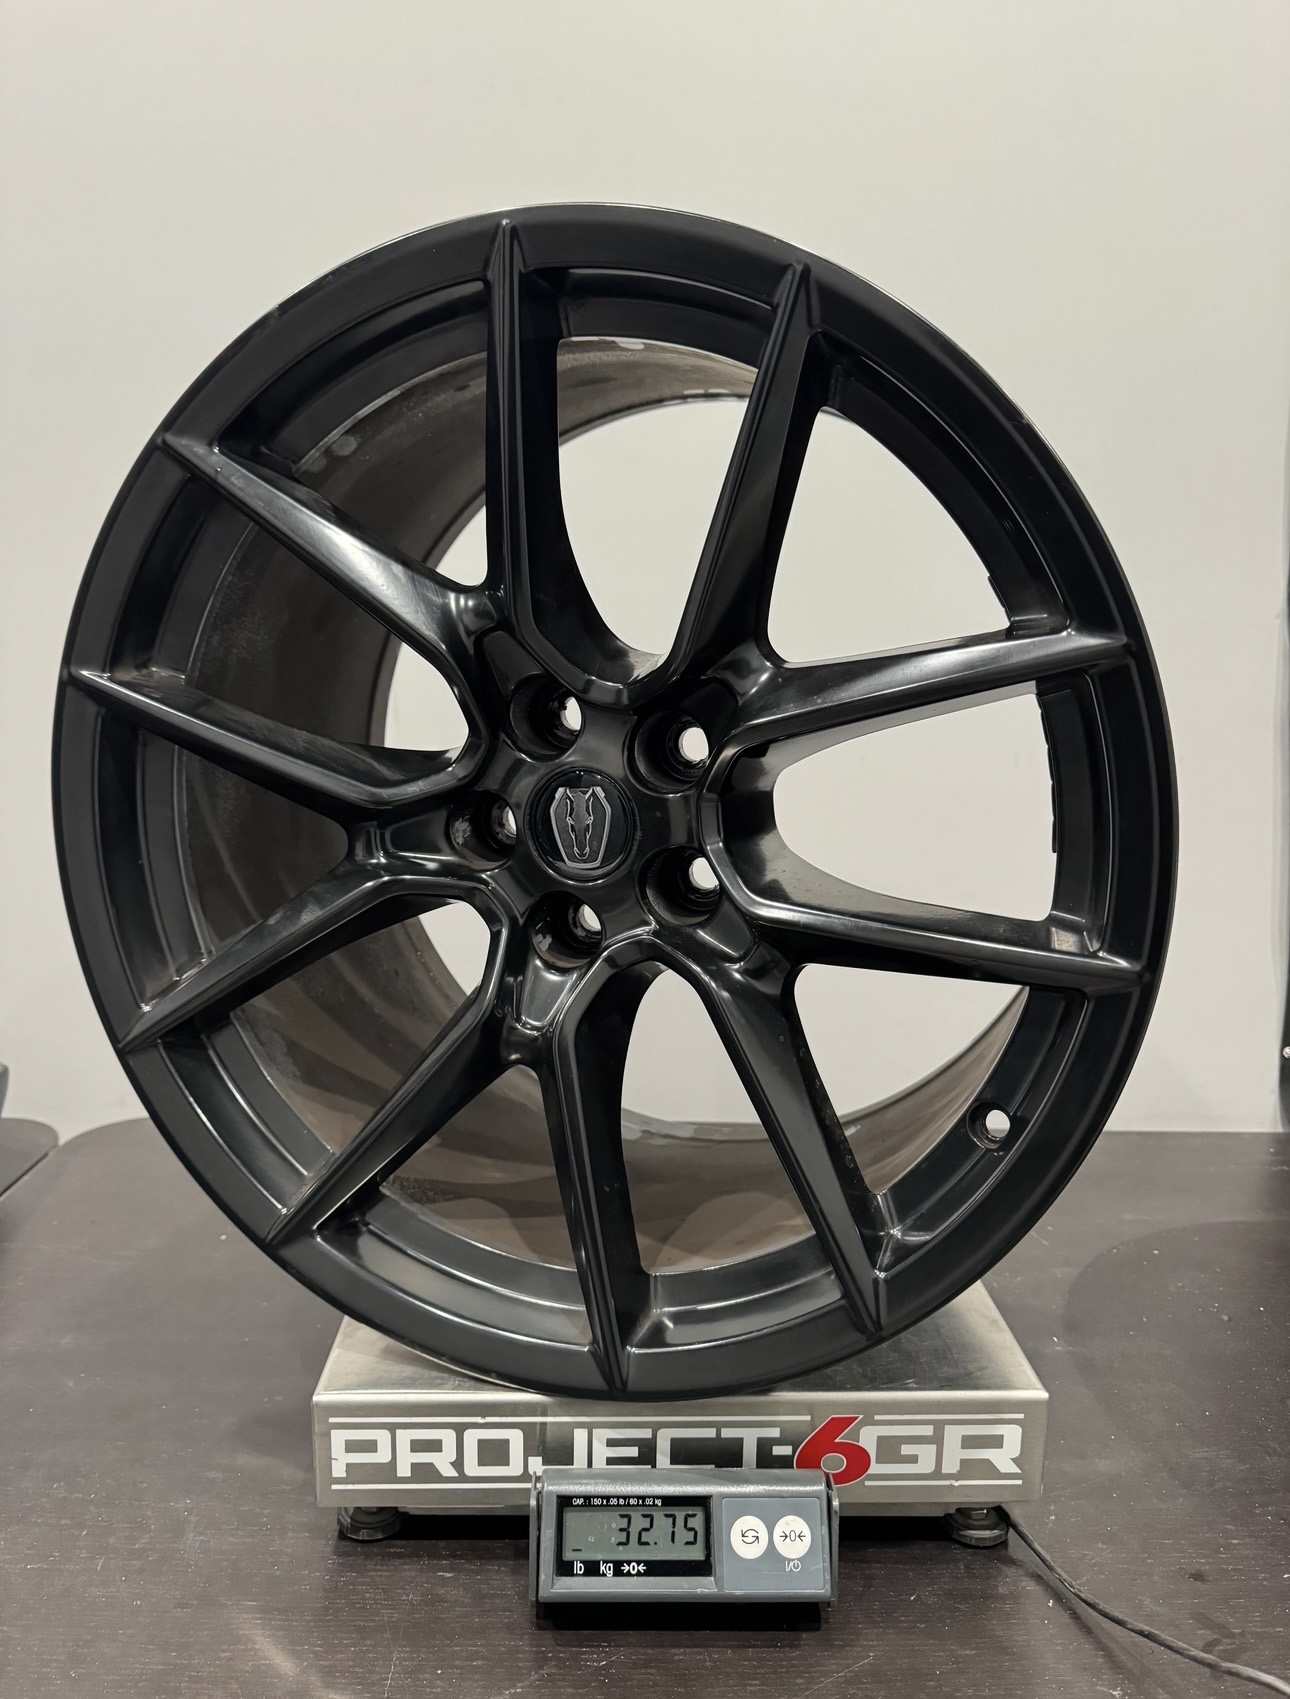 S650 Mustang Official S650 Dark Horse Aftermarket Wheel/Tire Thread! IMG_0903